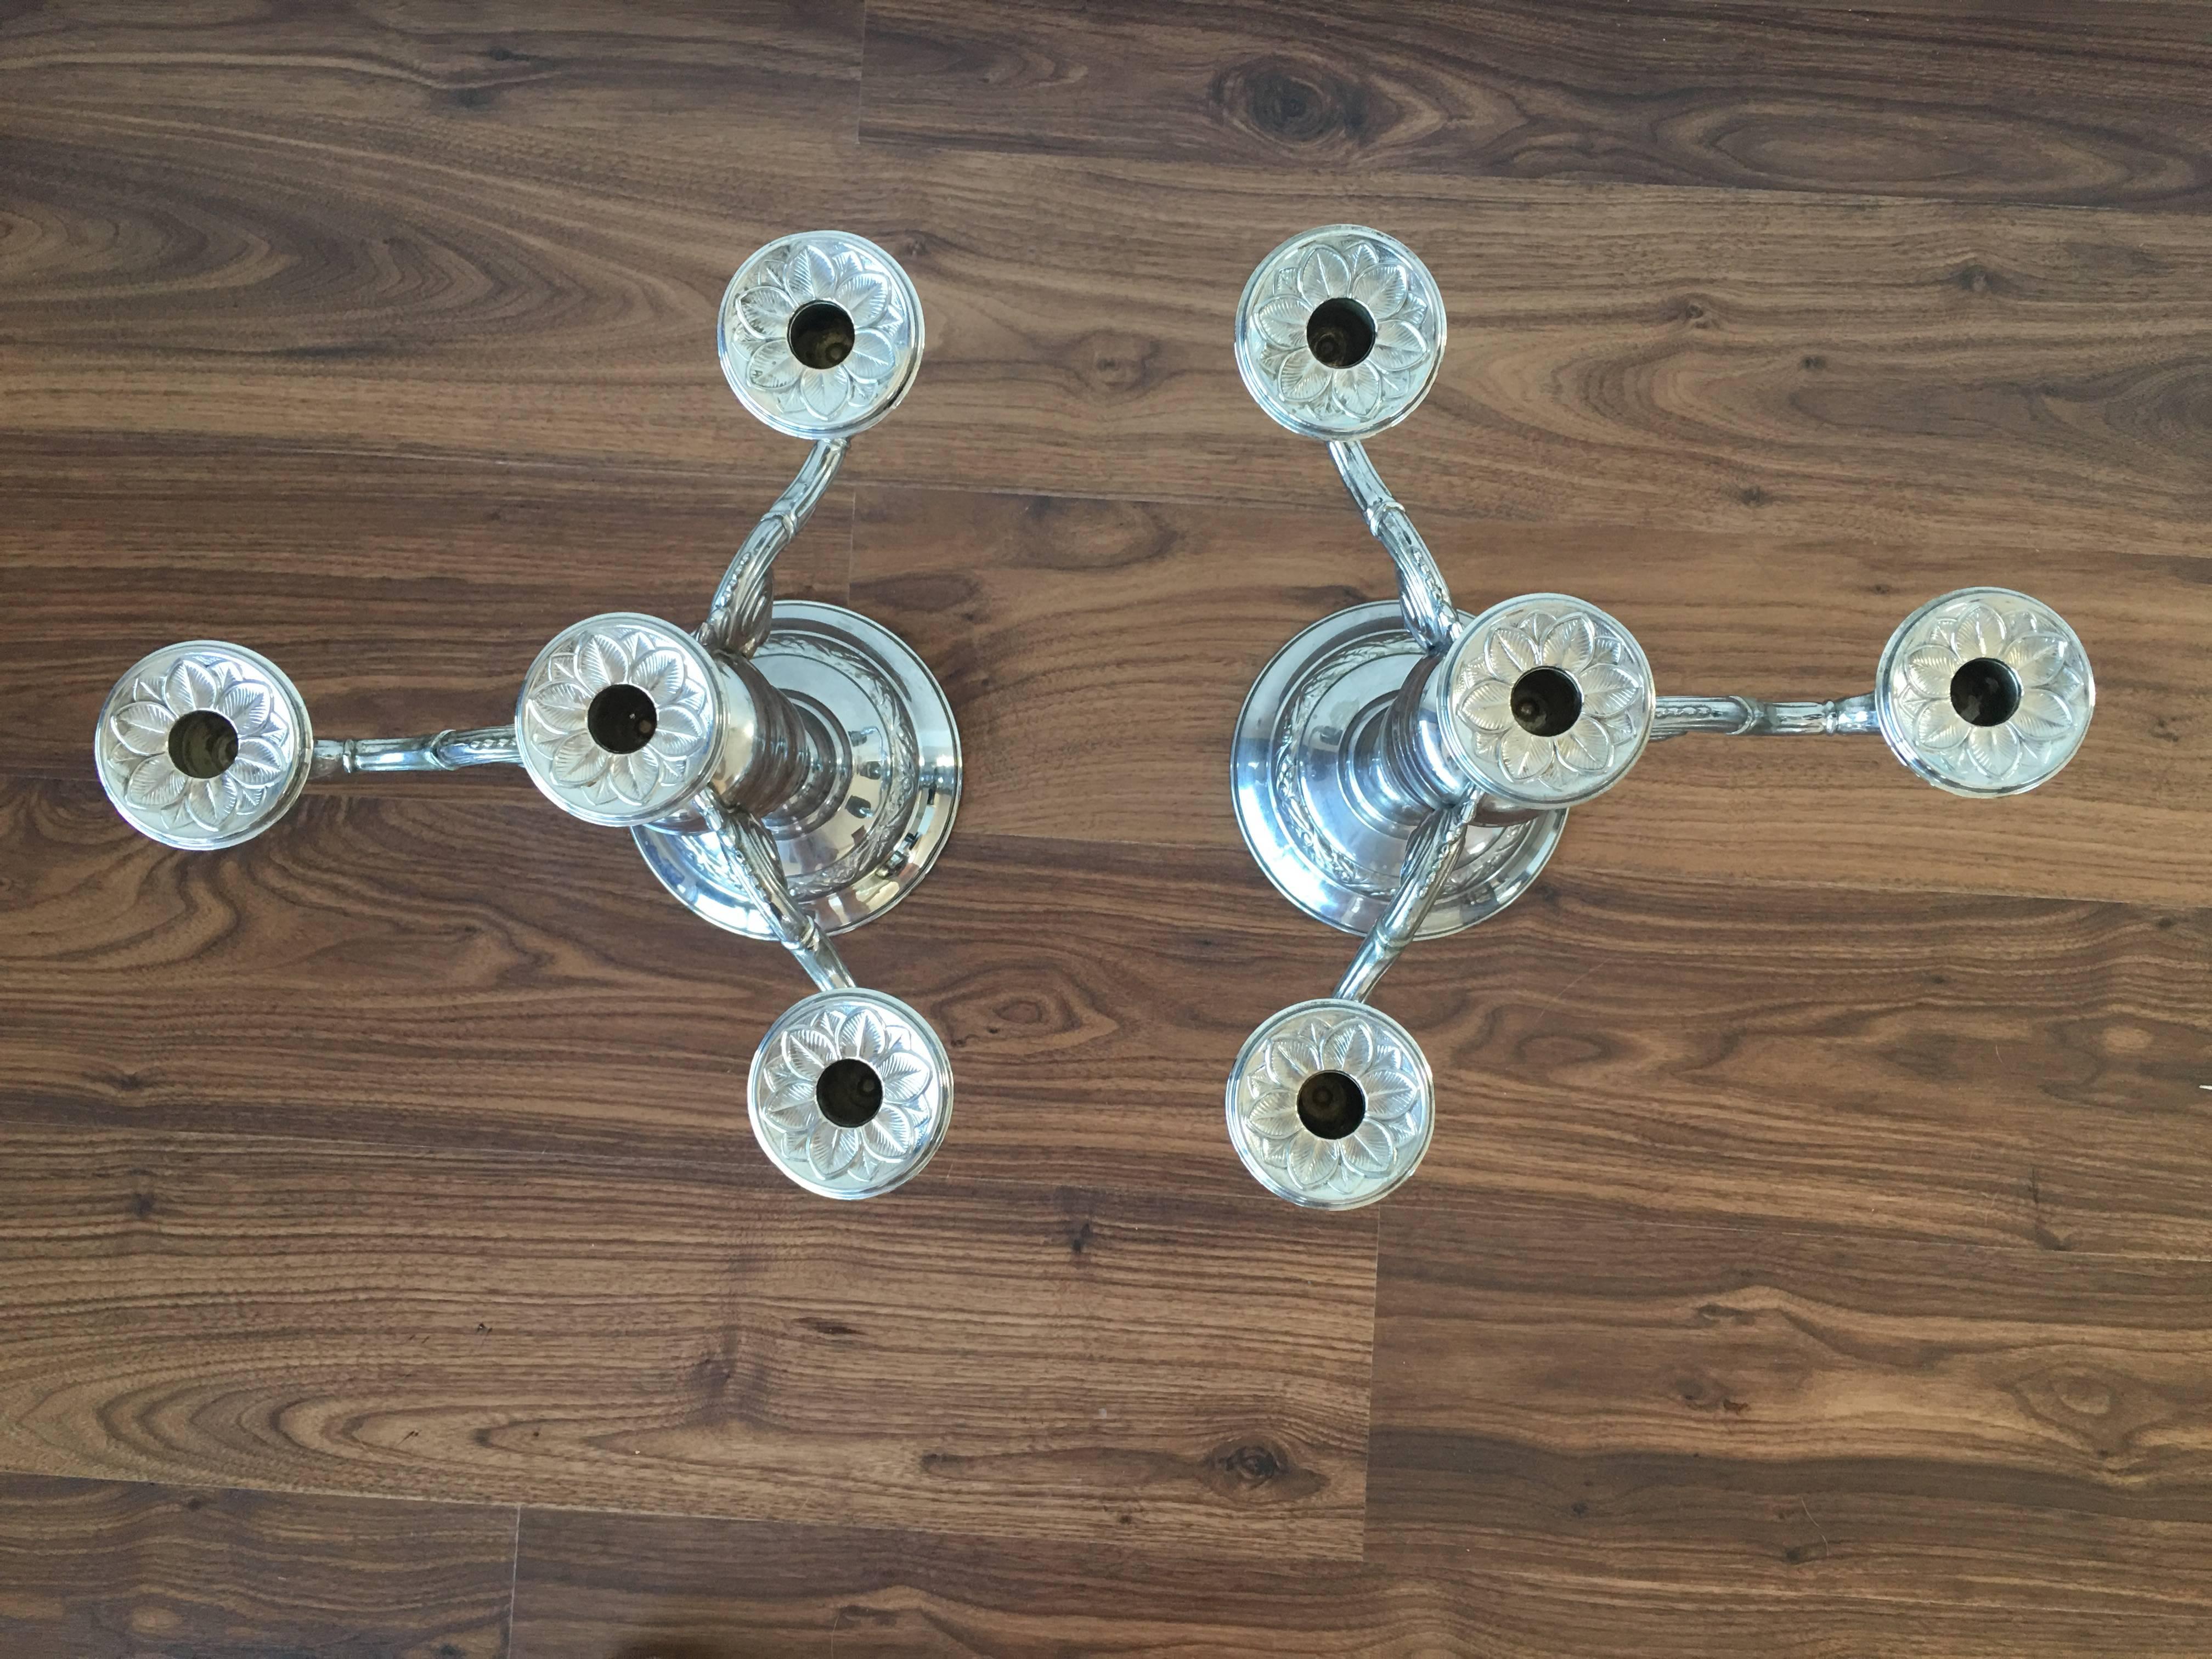 European Pair of Four-Armed Art Deco Candlesticks, 1930s-1940s, Sweden For Sale